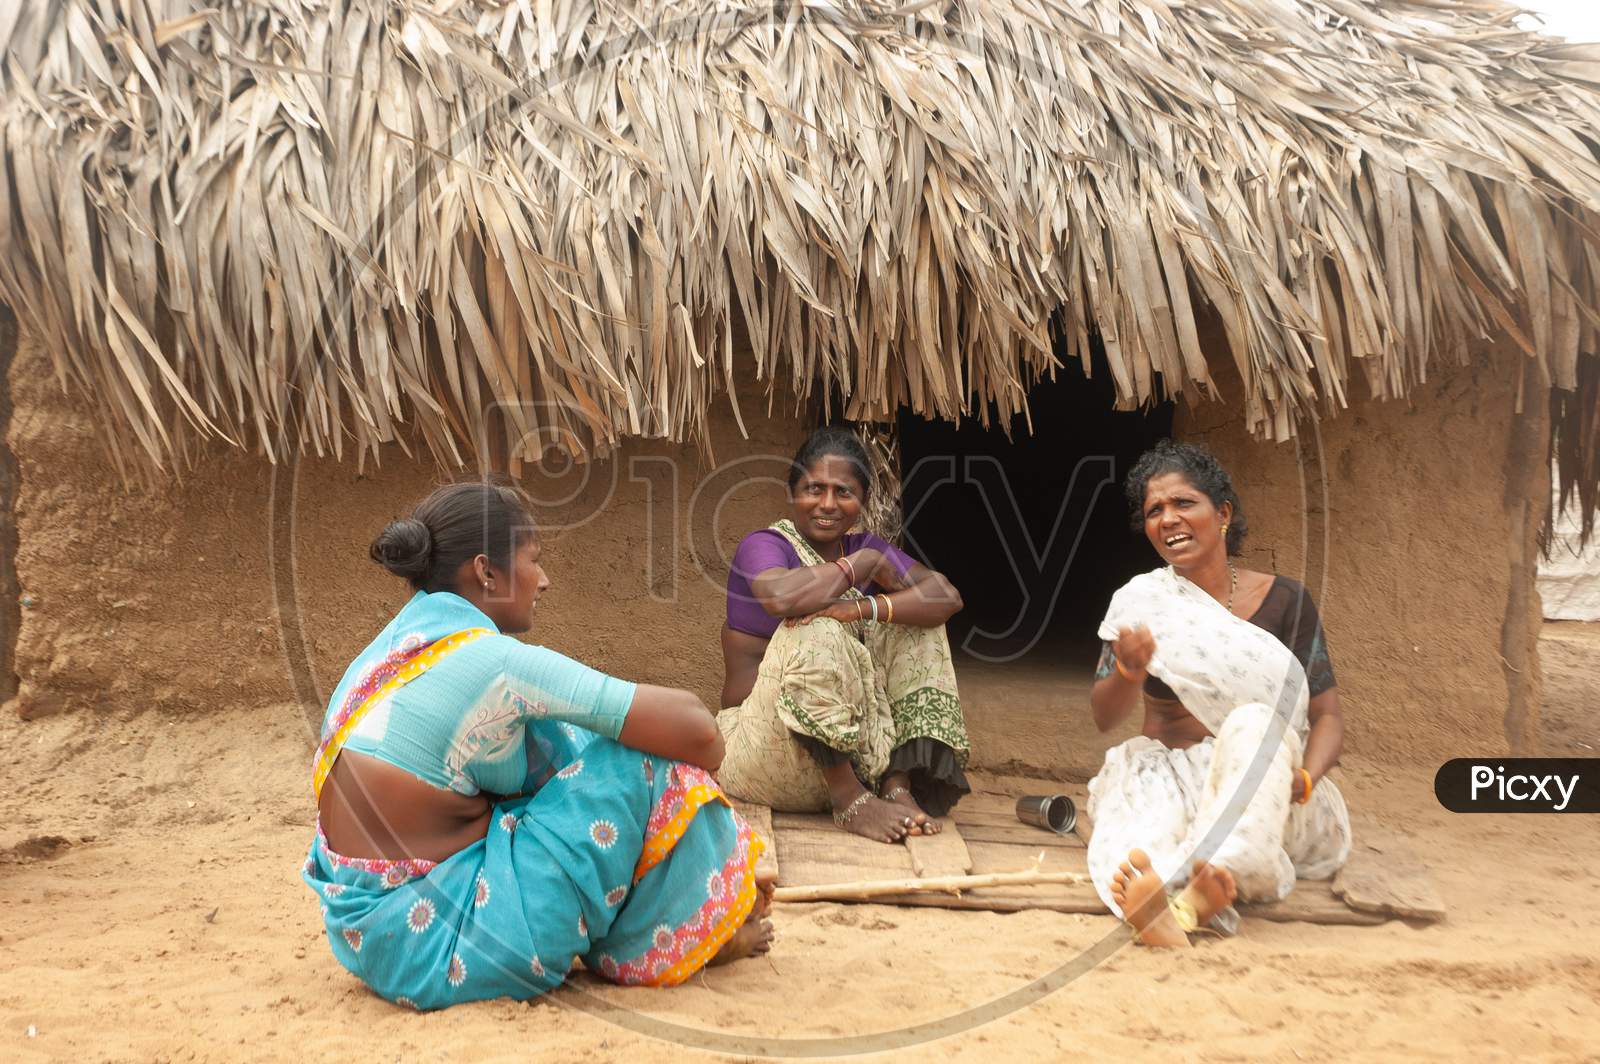 Indian Tribal Women having a conversation by the hut